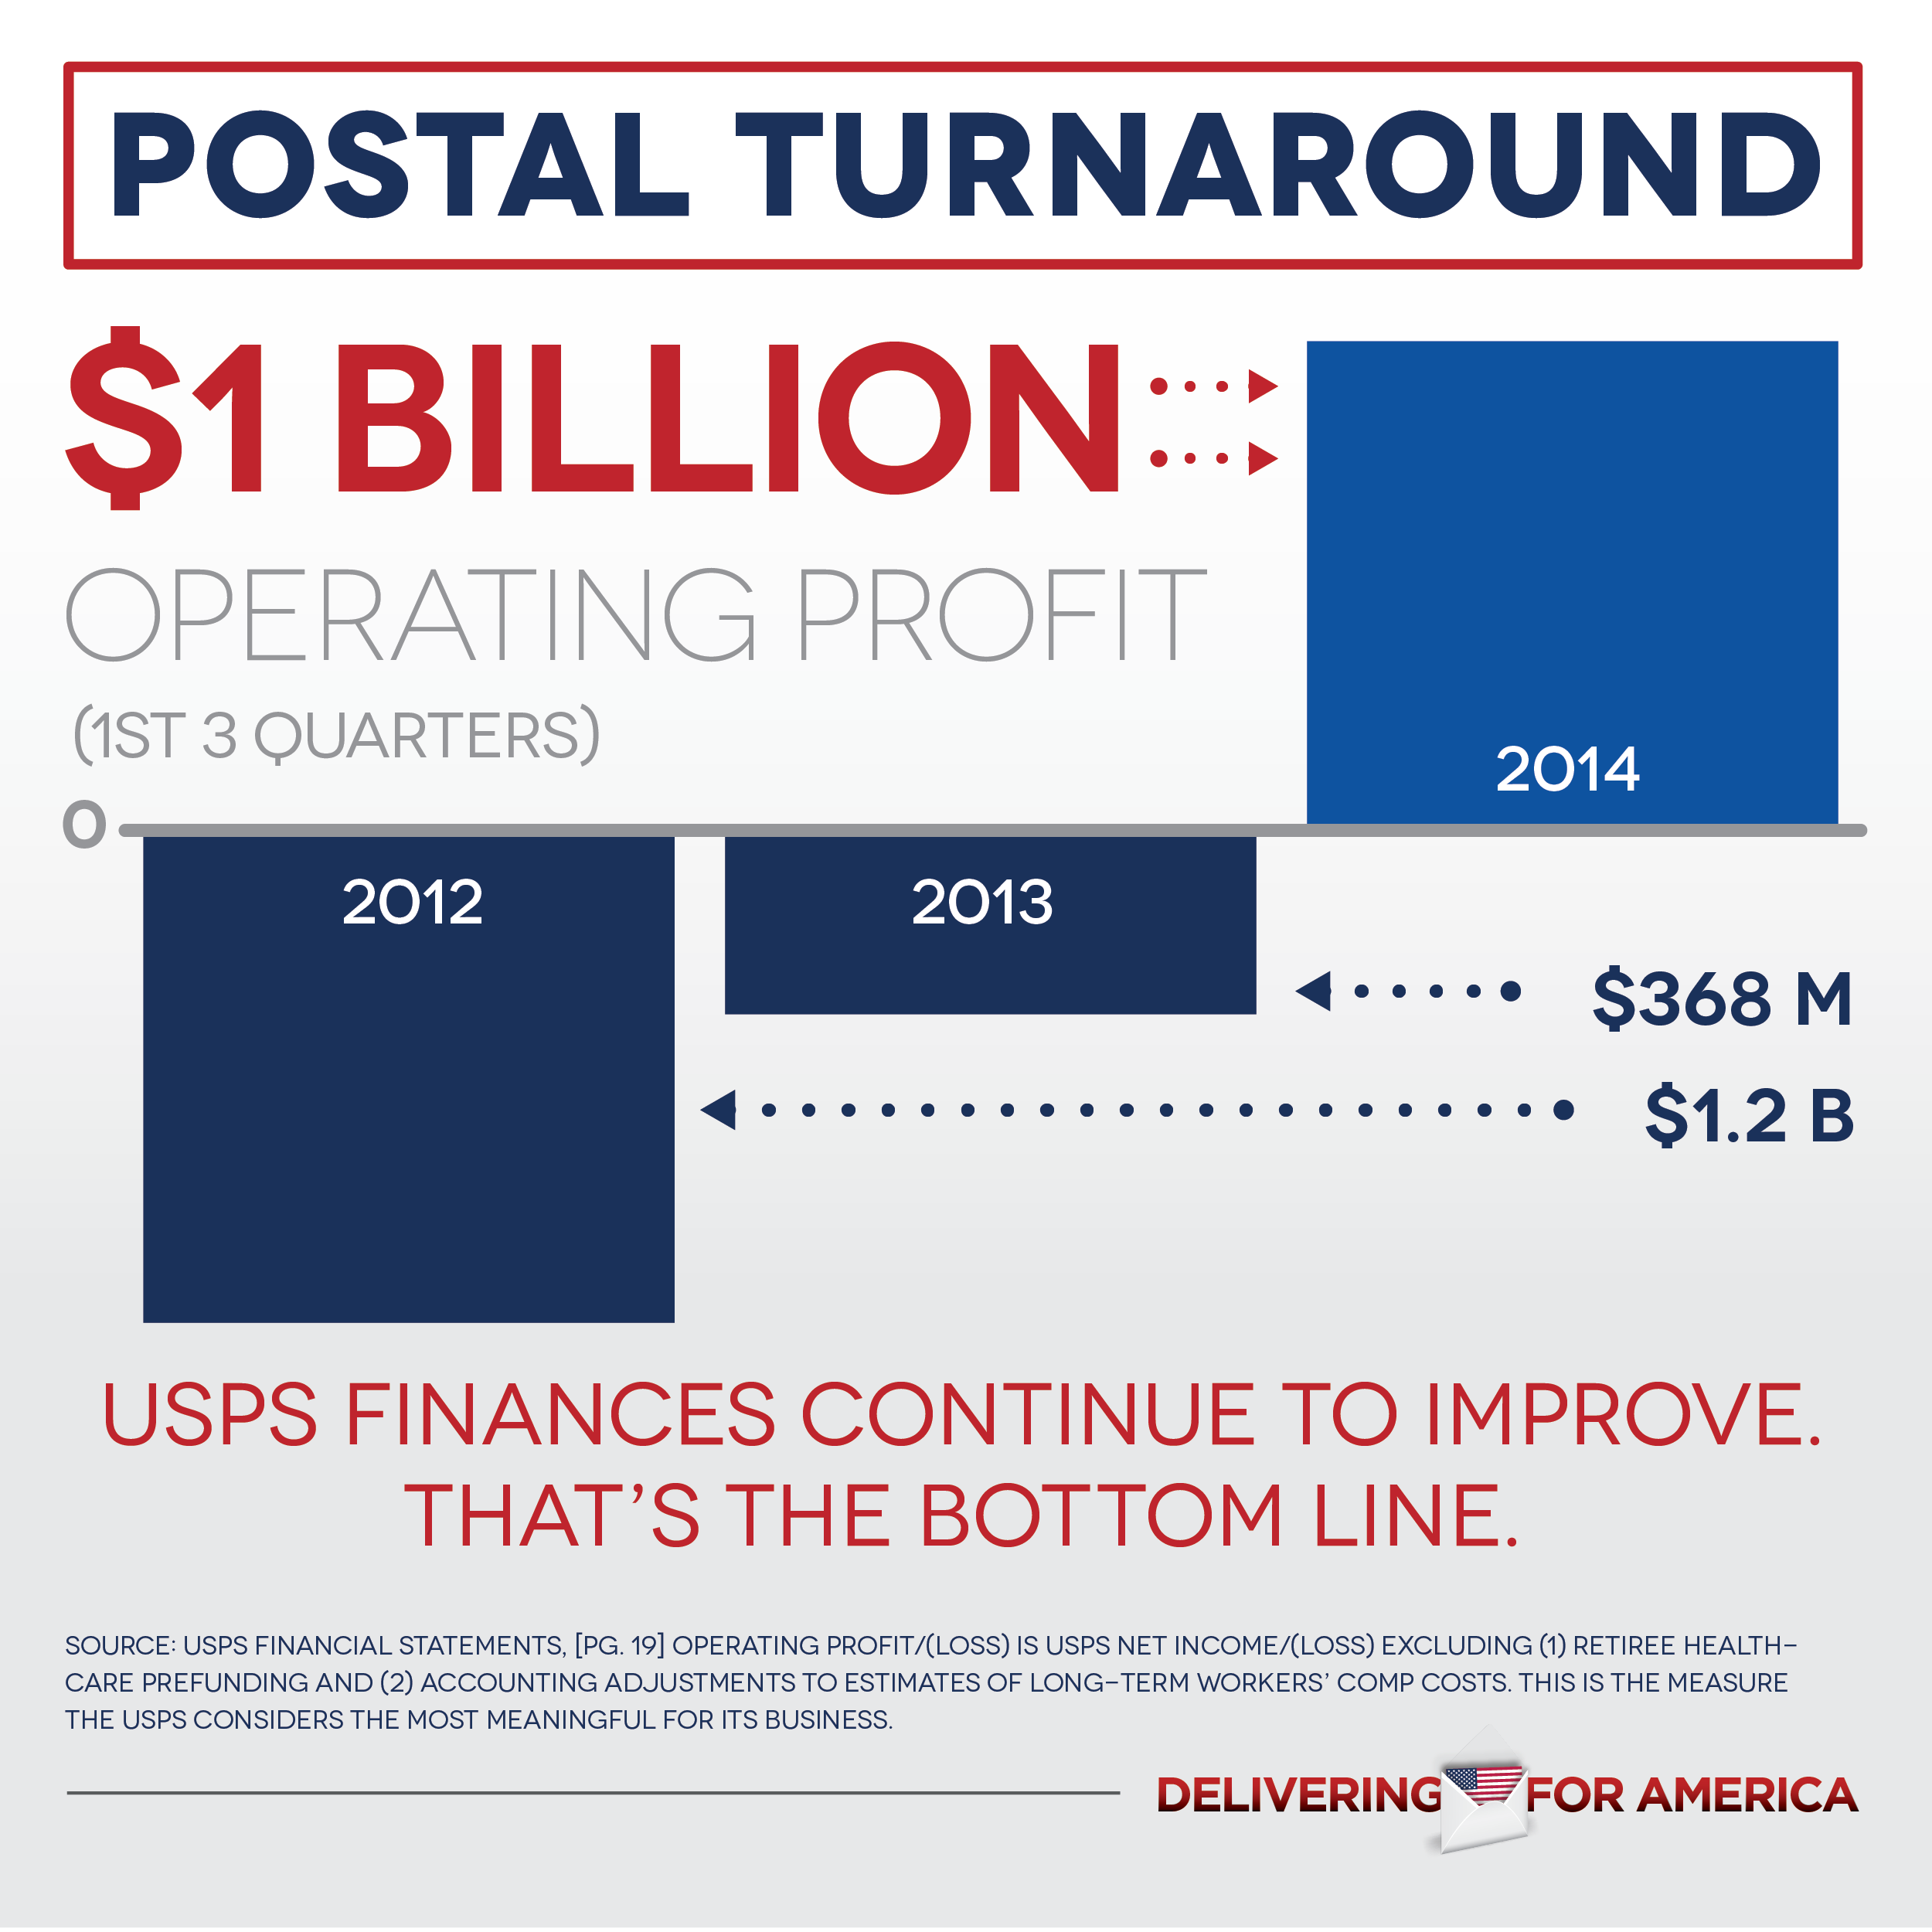 NALC Congress needs to preserve and strengthen USPS while fixing pre